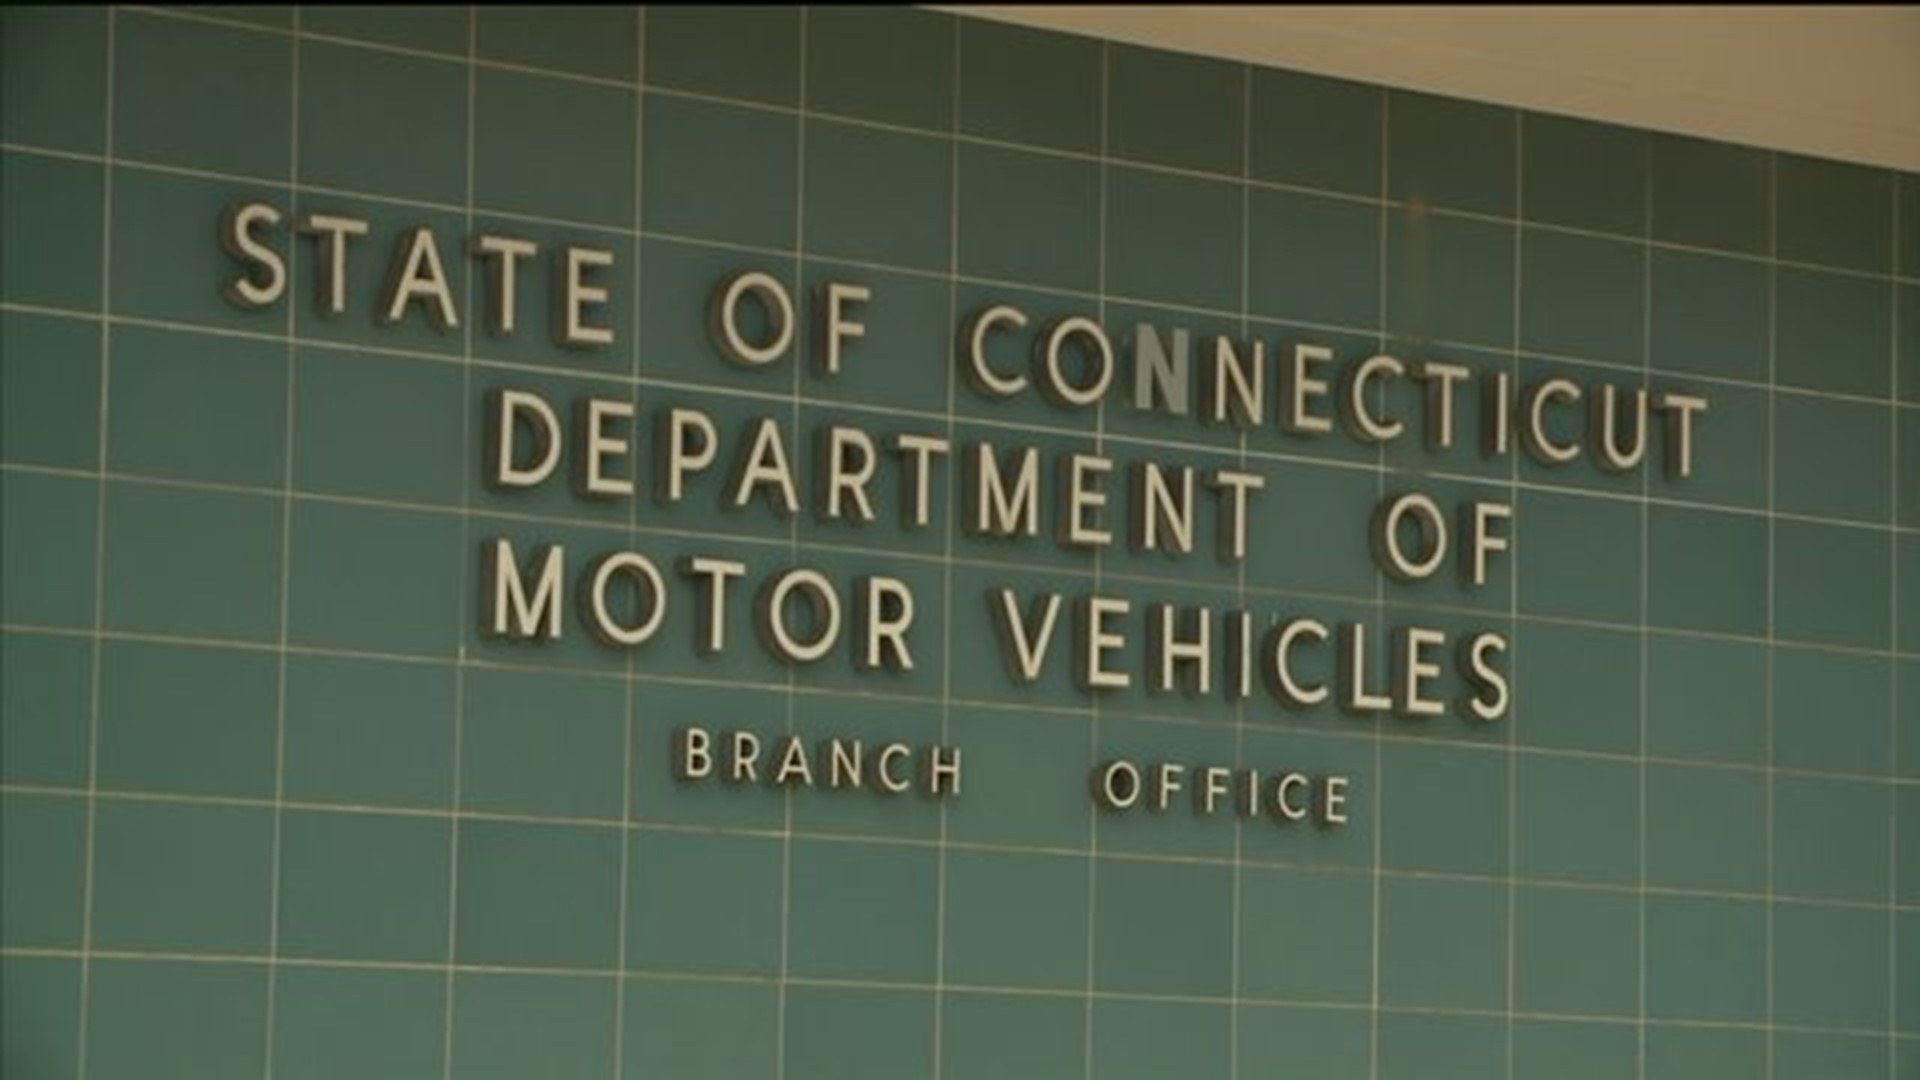 Long lines frustrate DMV custtomers